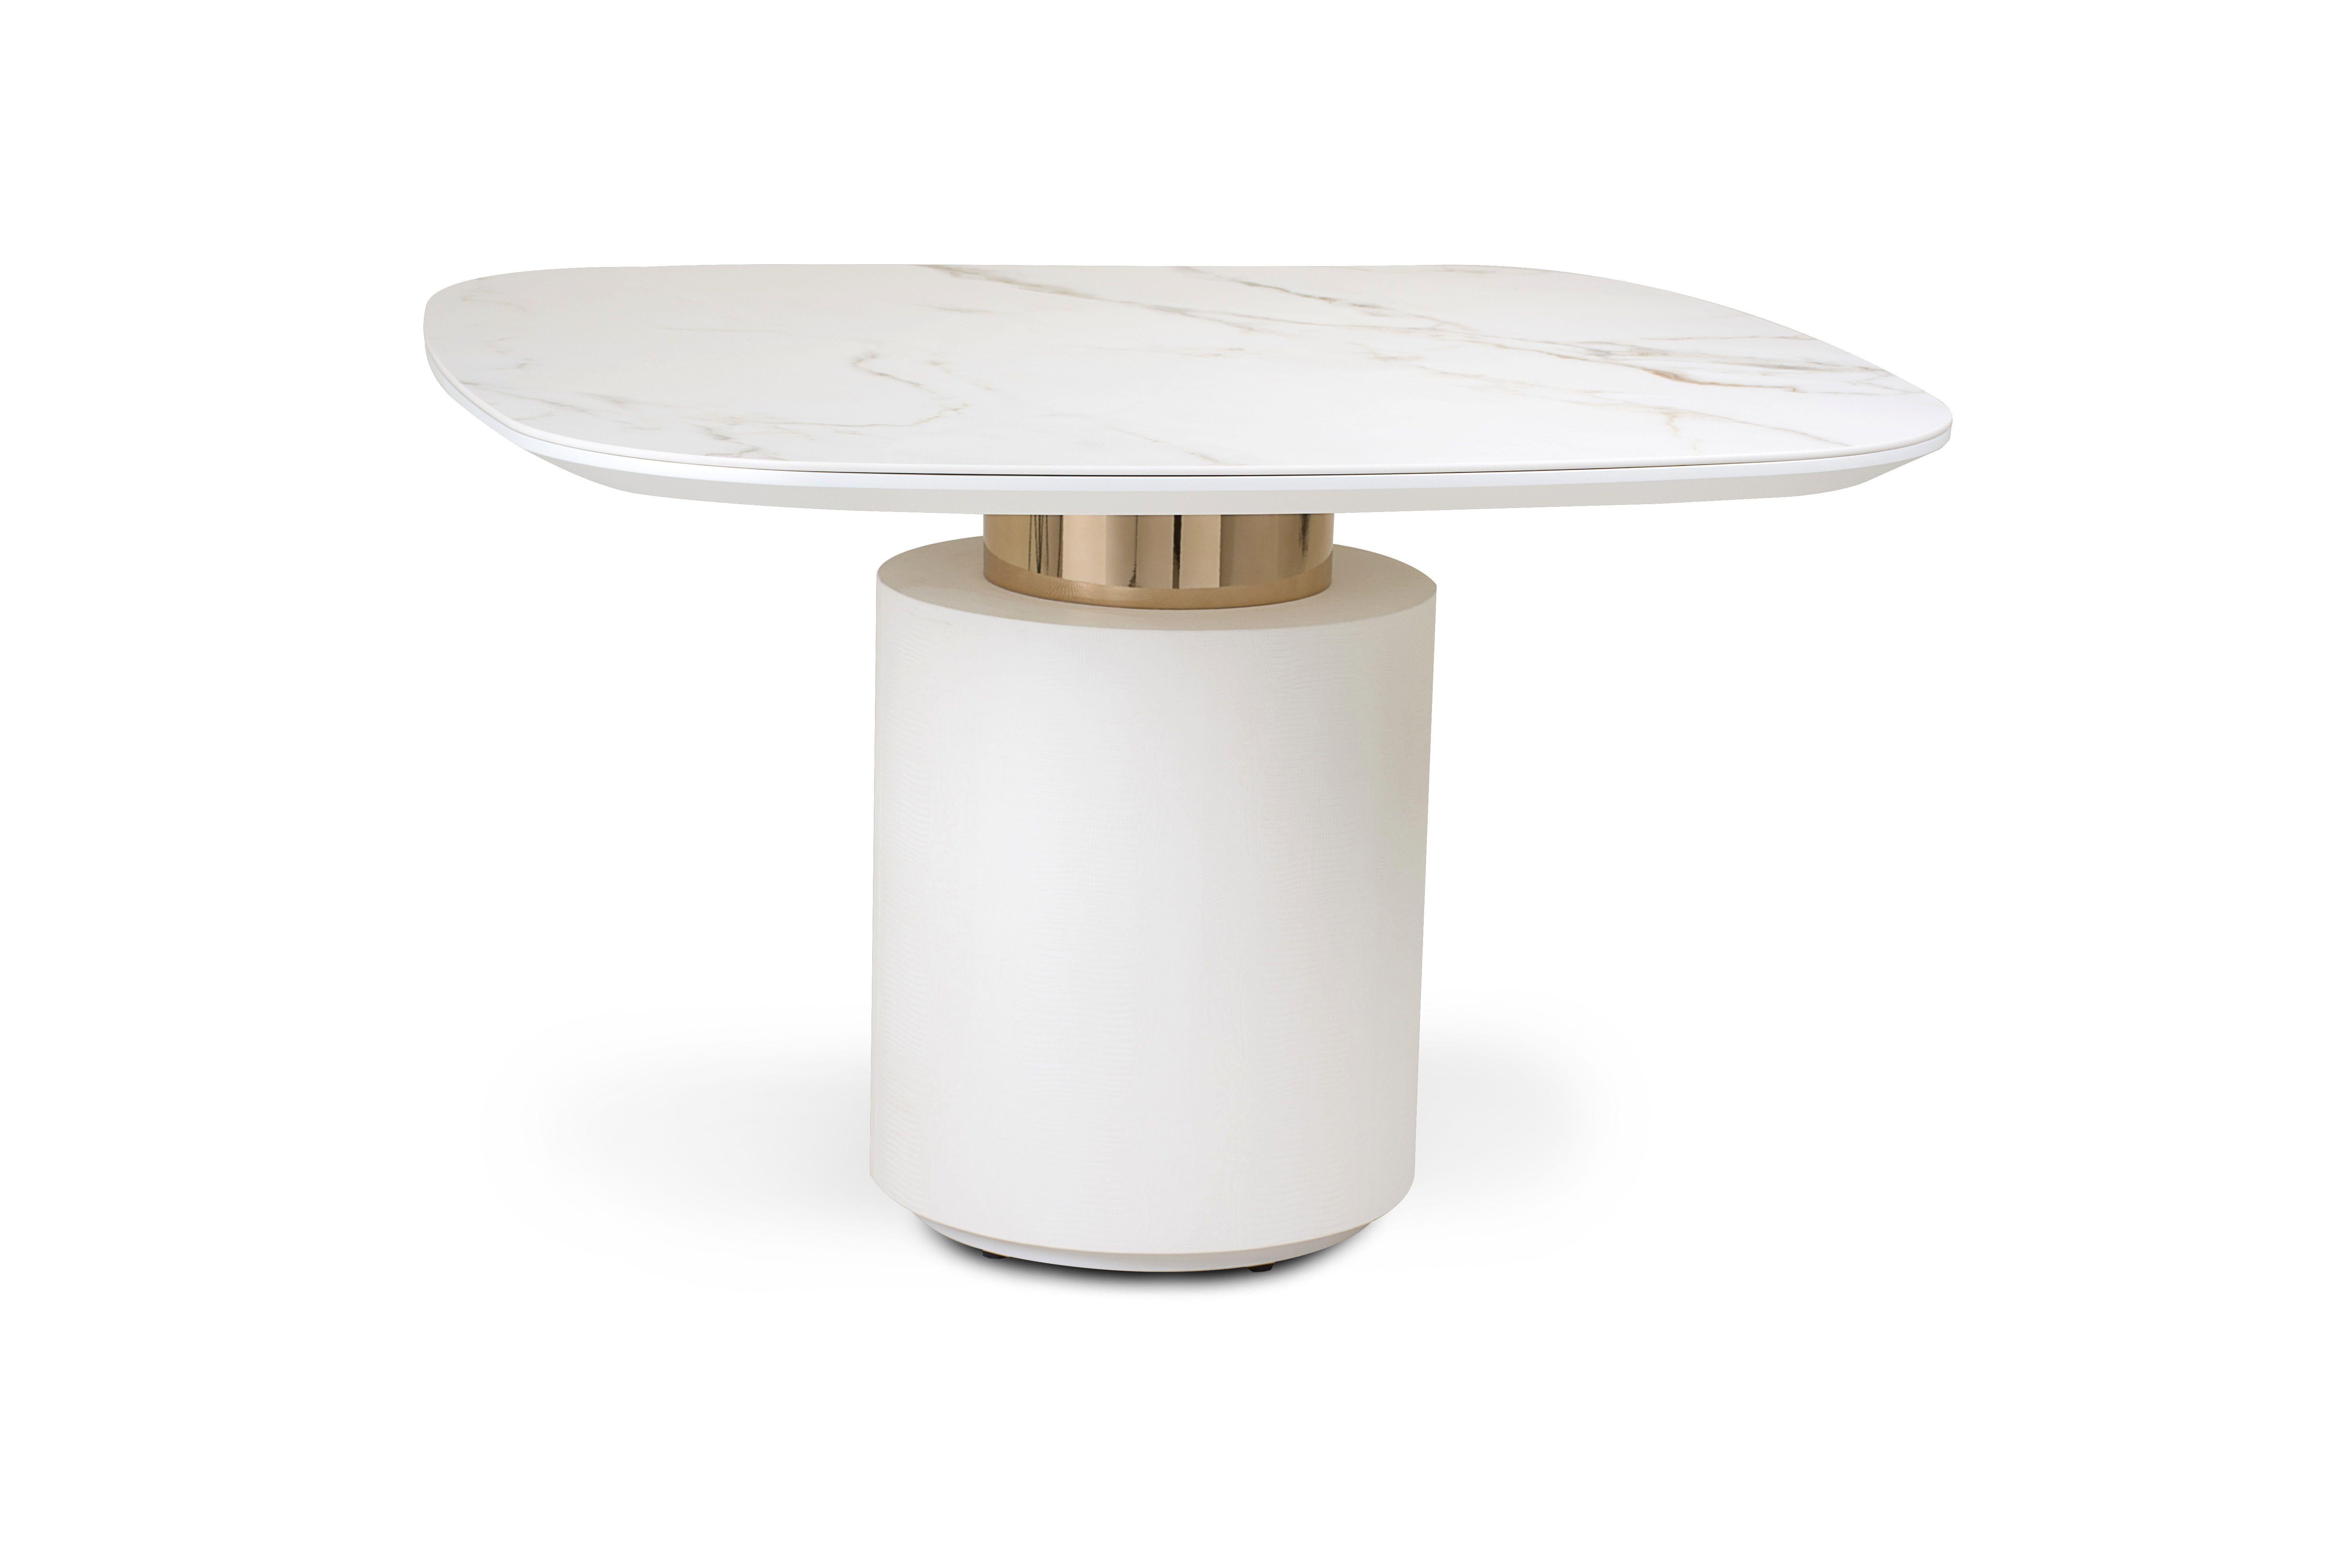 Another amazing piece from the Neruda Collection.
This round dining table has a top made of Gardenia Porcelain.
Base: MDF coated in faux leather with crocodile pattern in an off-white color 
Sides: coated in faux leather with crocodile pattern in